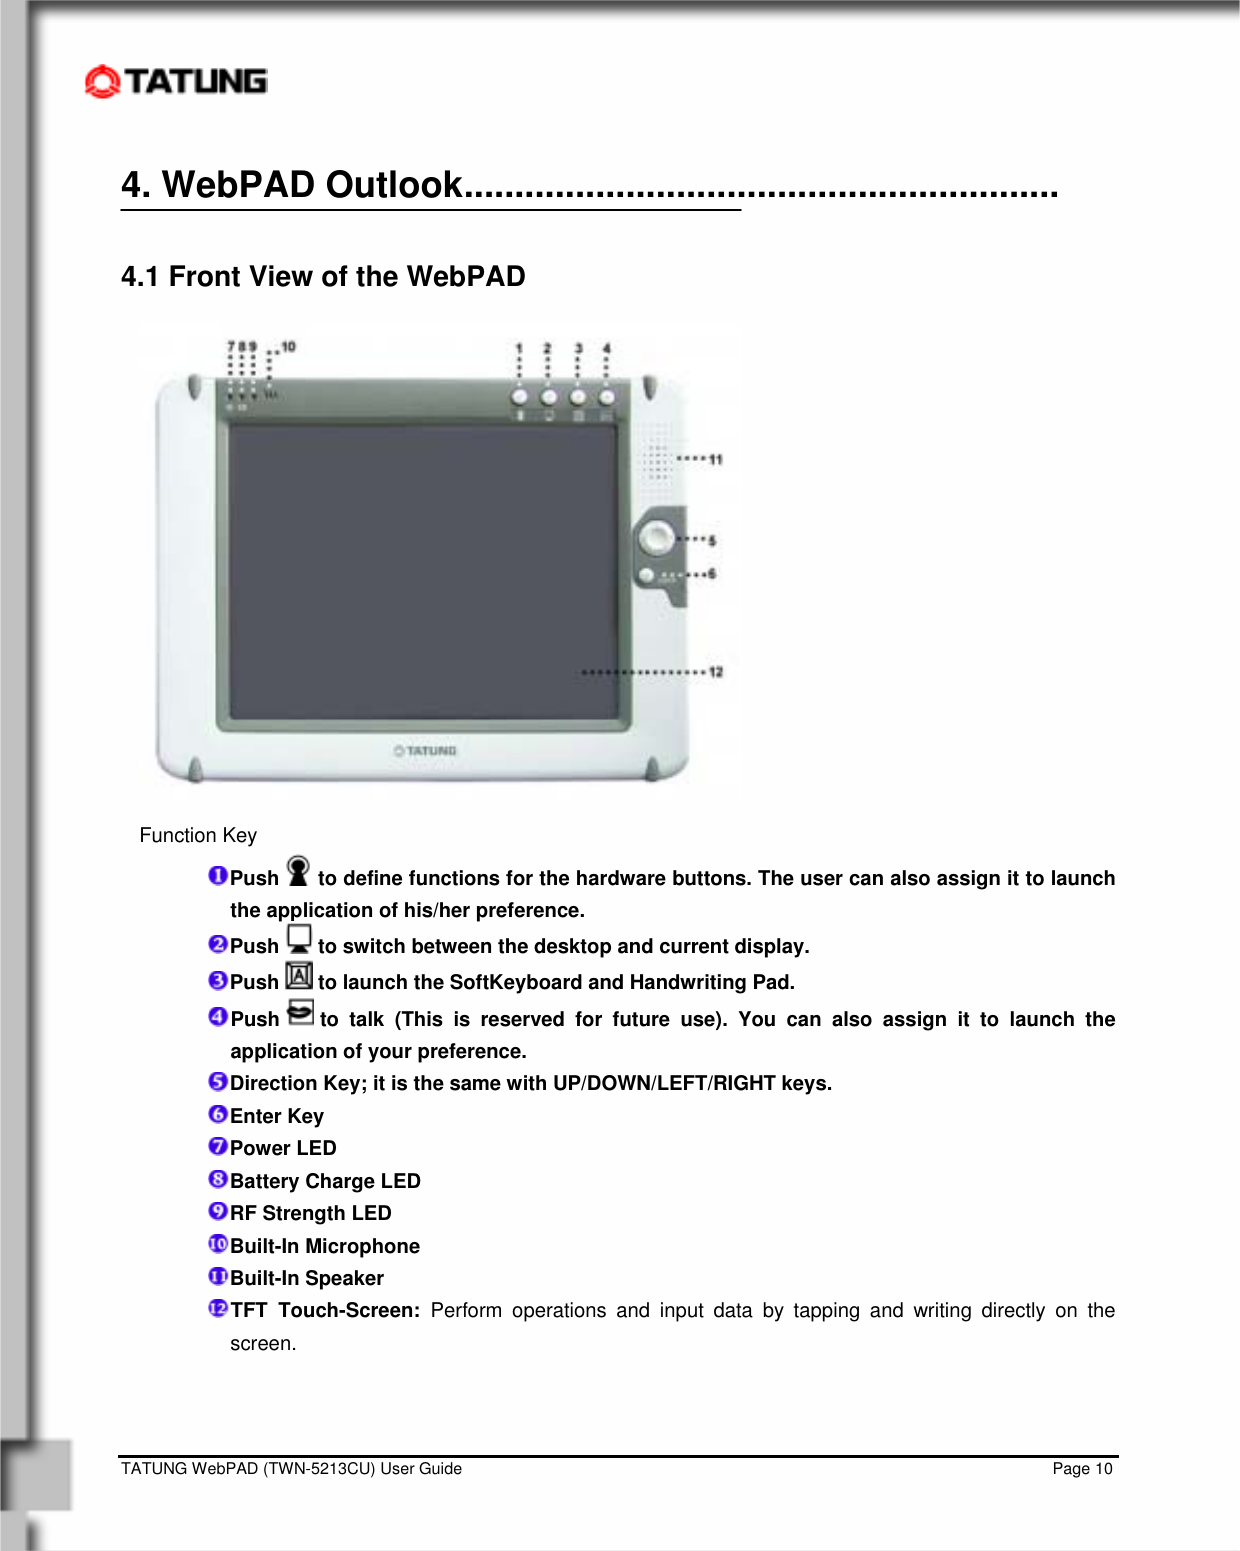    TATUNG WebPAD (TWN-5213CU) User Guide                                                                                                                                   Page 10 4. WebPAD Outlook...........................................................  4.1 Front View of the WebPAD  Function Key  Push   to define functions for the hardware buttons. The user can also assign it to launch the application of his/her preference. Push   to switch between the desktop and current display. Push   to launch the SoftKeyboard and Handwriting Pad. Push   to talk (This is reserved for future use). You can also assign it to launch the application of your preference.  Direction Key; it is the same with UP/DOWN/LEFT/RIGHT keys. Enter Key Power LED  Battery Charge LED RF Strength LED Built-In Microphone Built-In Speaker TFT Touch-Screen: Perform operations and input data by tapping and writing directly on the screen.  